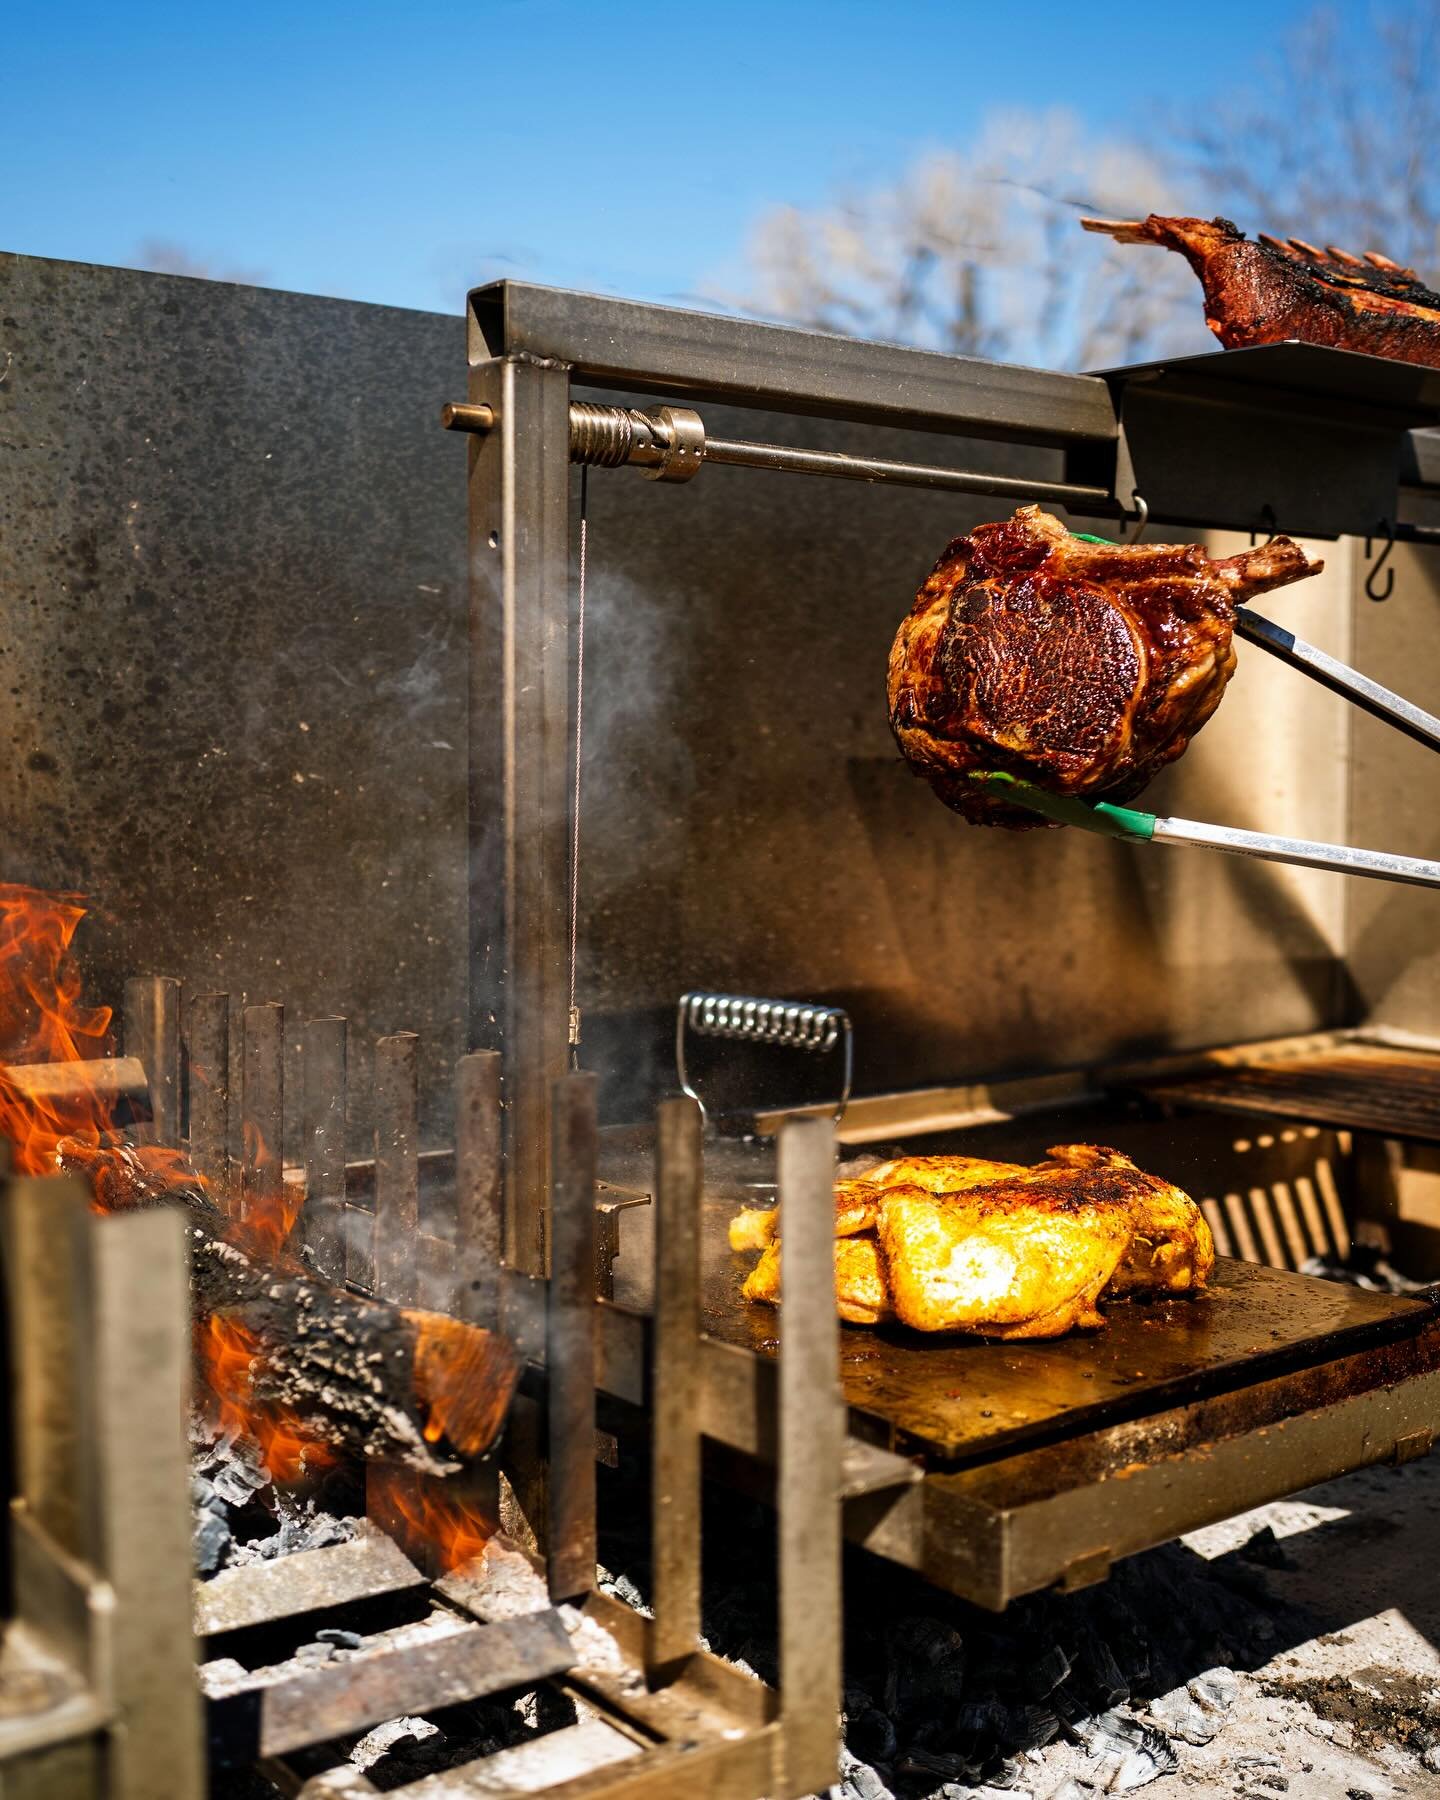 The fire grilled cuisine that our clients and friends pull off their grill makes us so happy&hellip;and hungry. 

Thanks @chefprestonpaine 
.
.
.
.
.
#gauchogrills #grillthisway #texasgrill #outdoorliving #outdoorkitchen #patiodreams #argentineangril